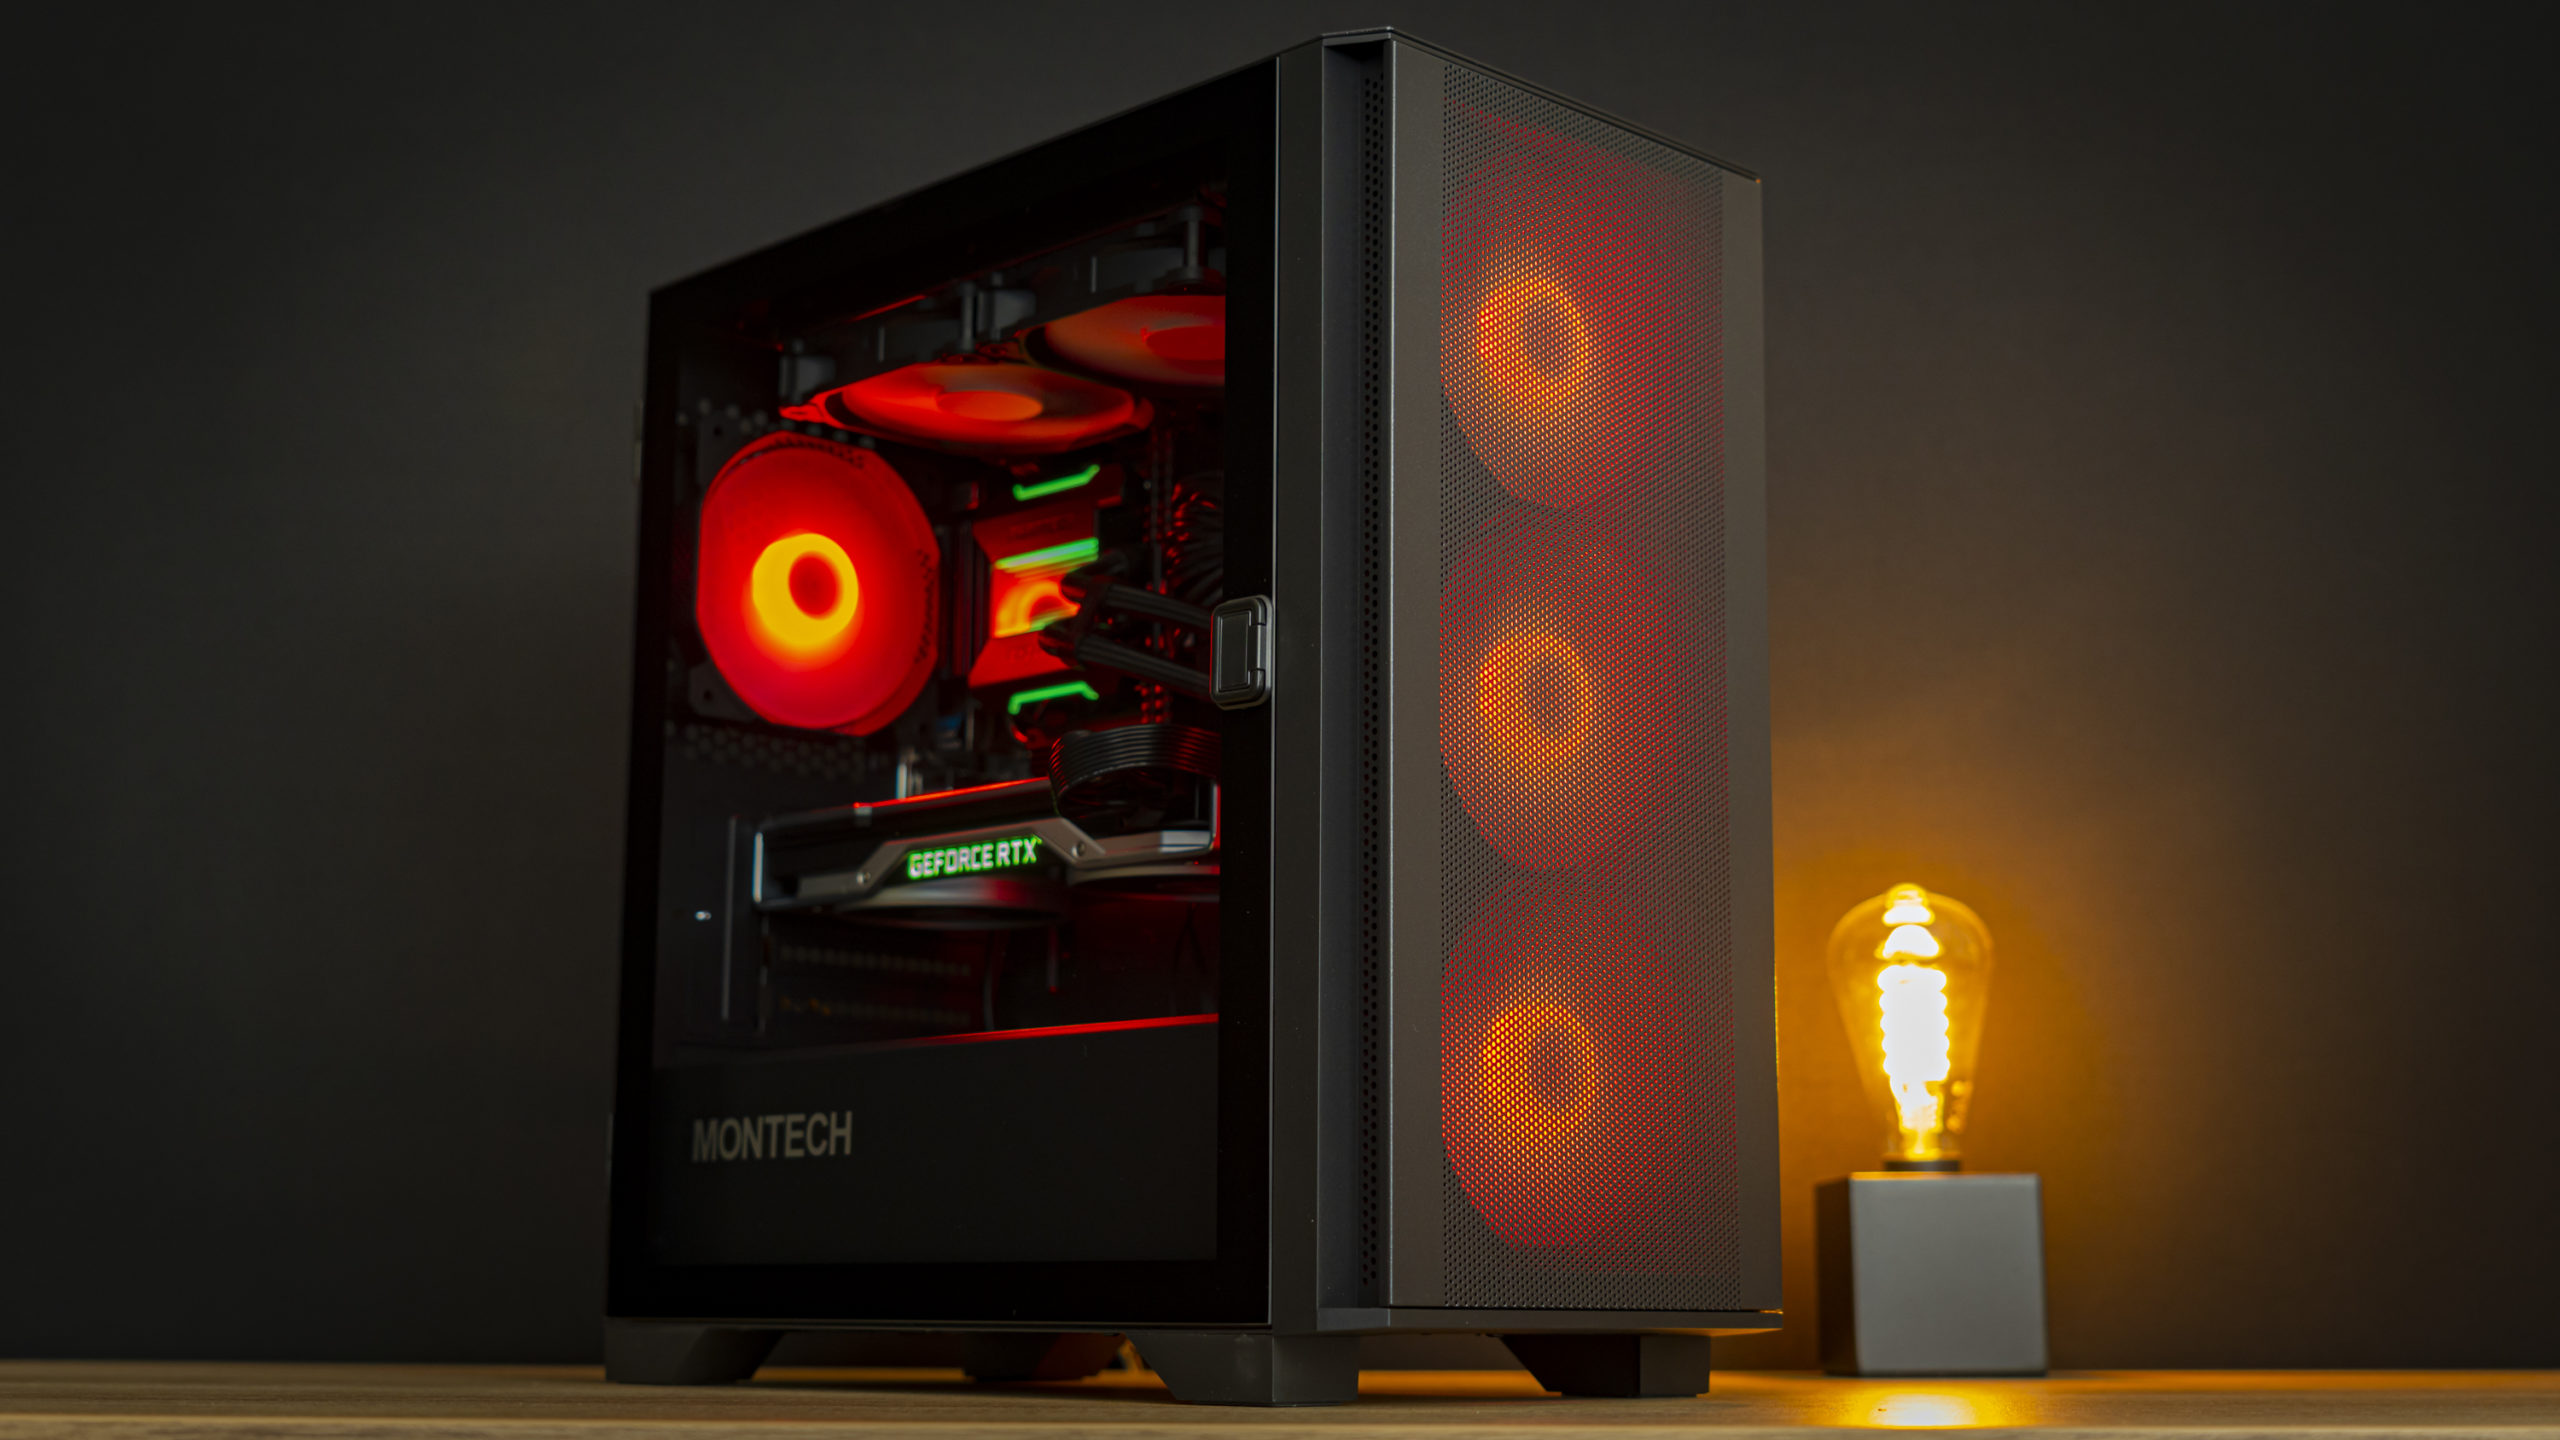 montech-air-100-review:-a-case-and-4-rgb-fans-for-$70?